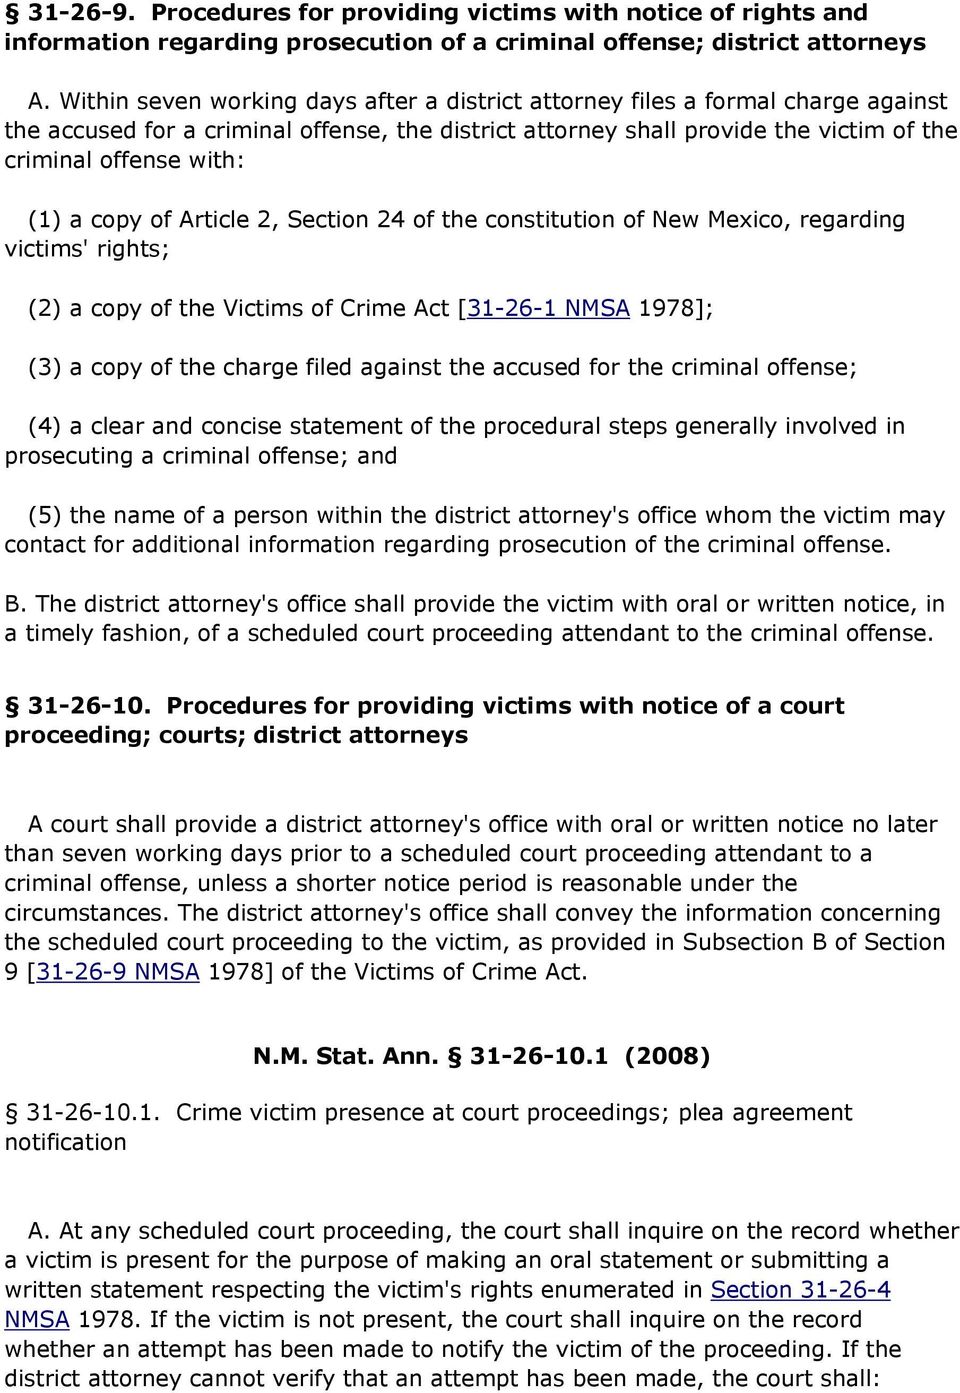 a copy of Article 2, Section 24 of the constitution of New Mexico, regarding victims' rights; (2) a copy of the Victims of Crime Act [31-26-1 NMSA 1978]; (3) a copy of the charge filed against the